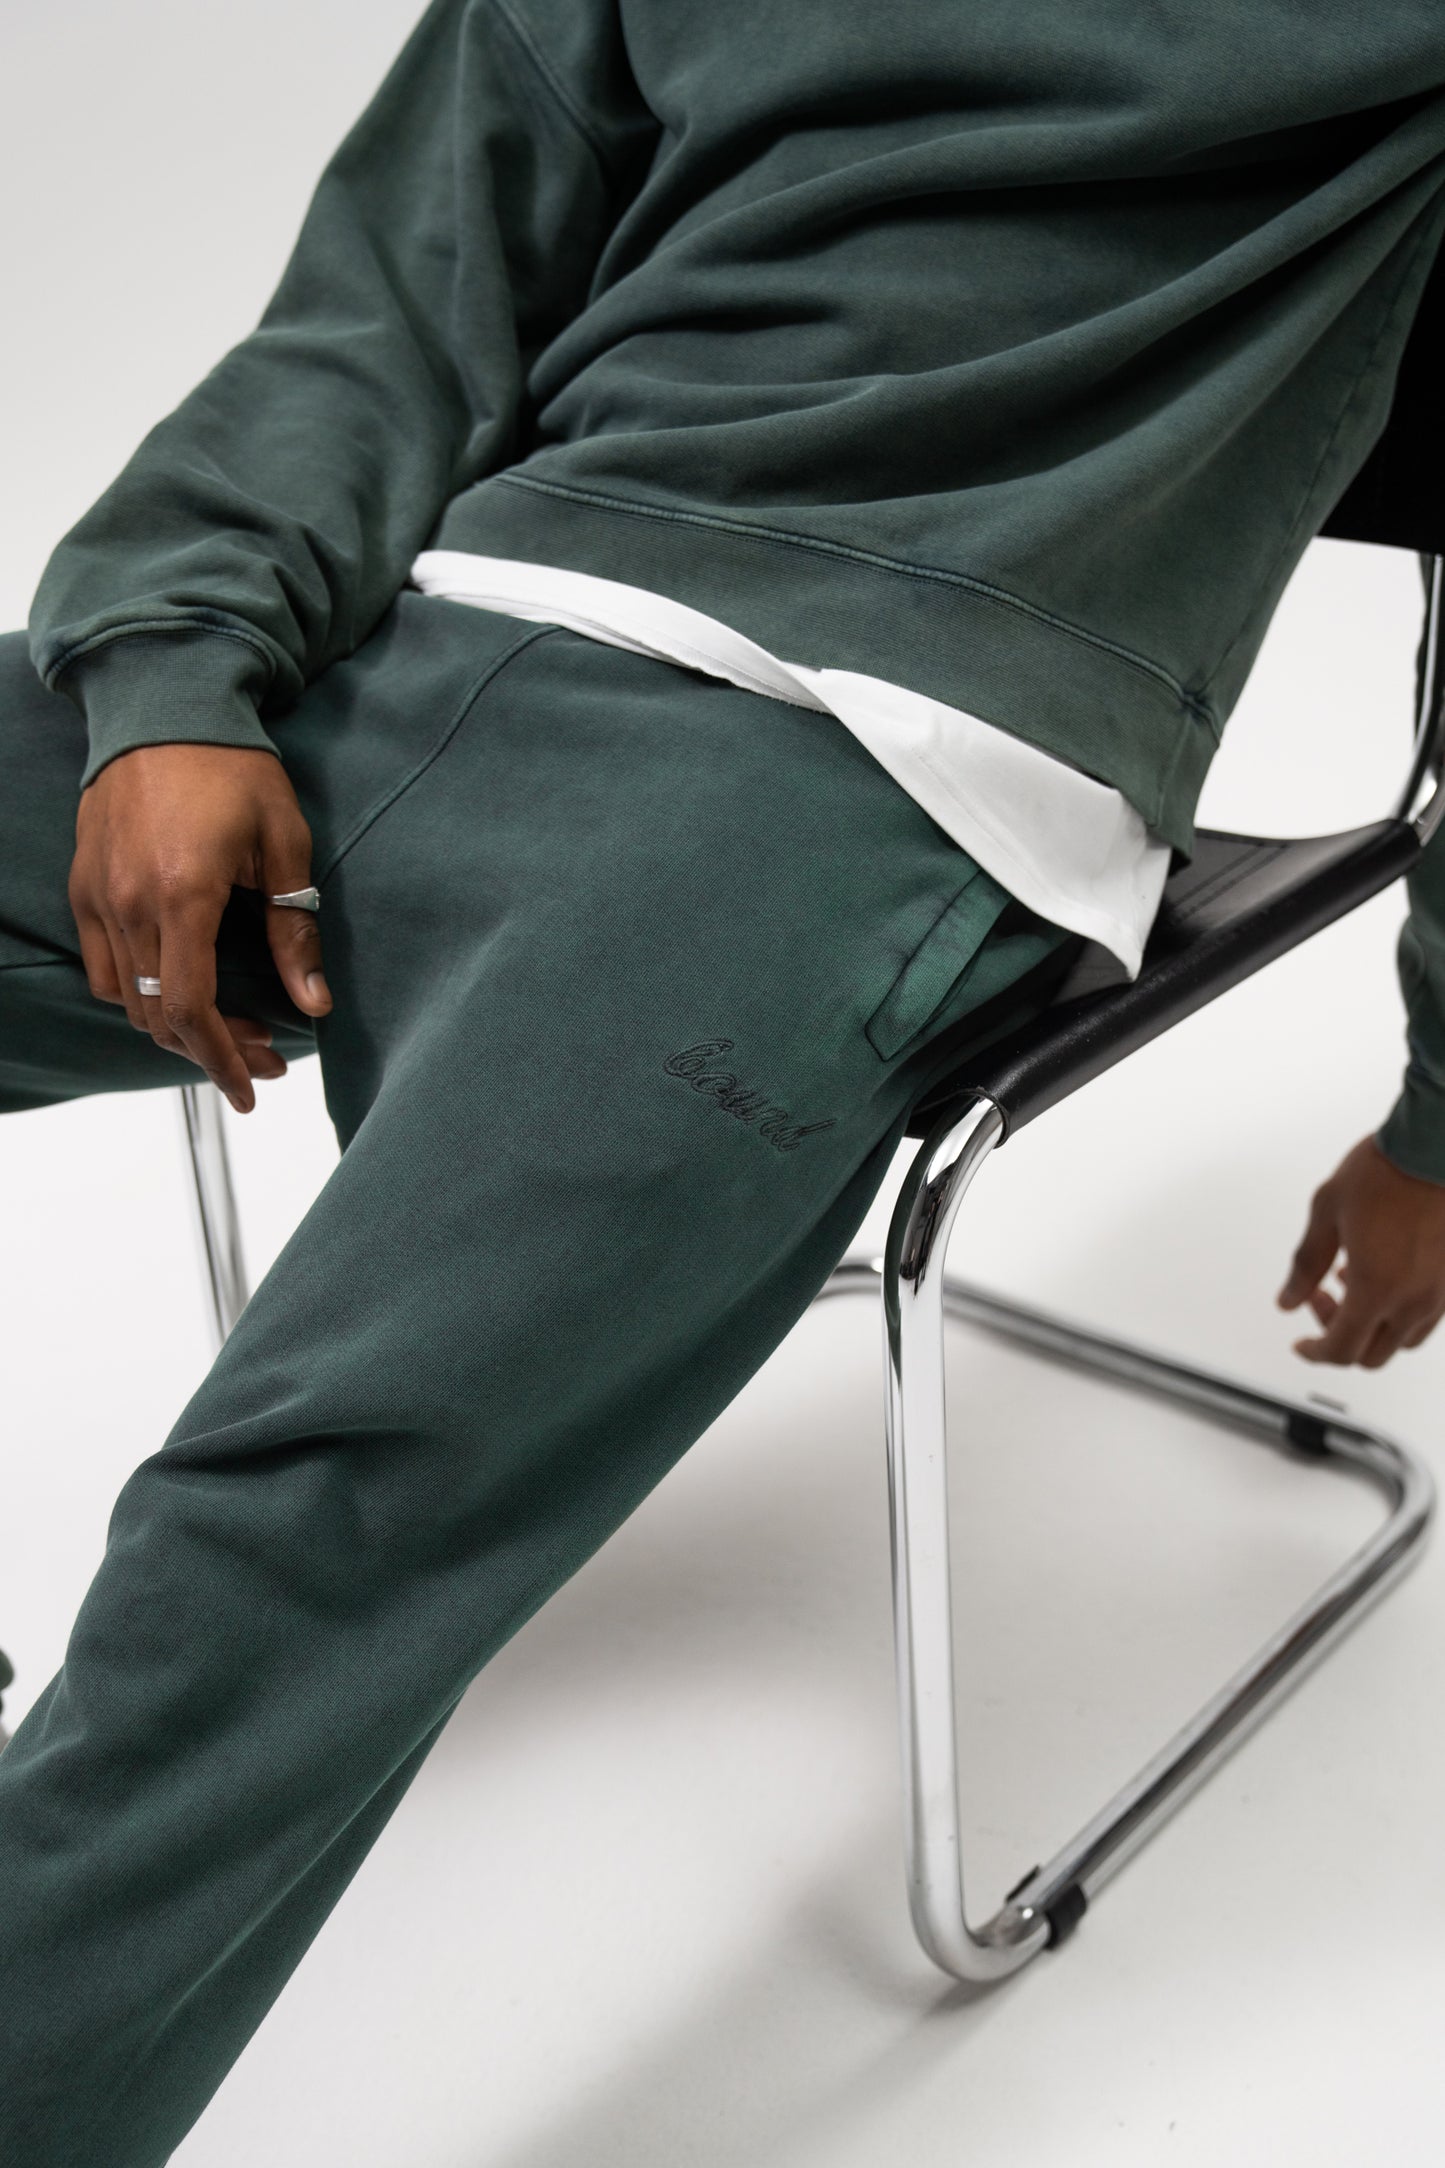 SUSTAIN WASHED GREEN HOODIE & JOGGERS SET